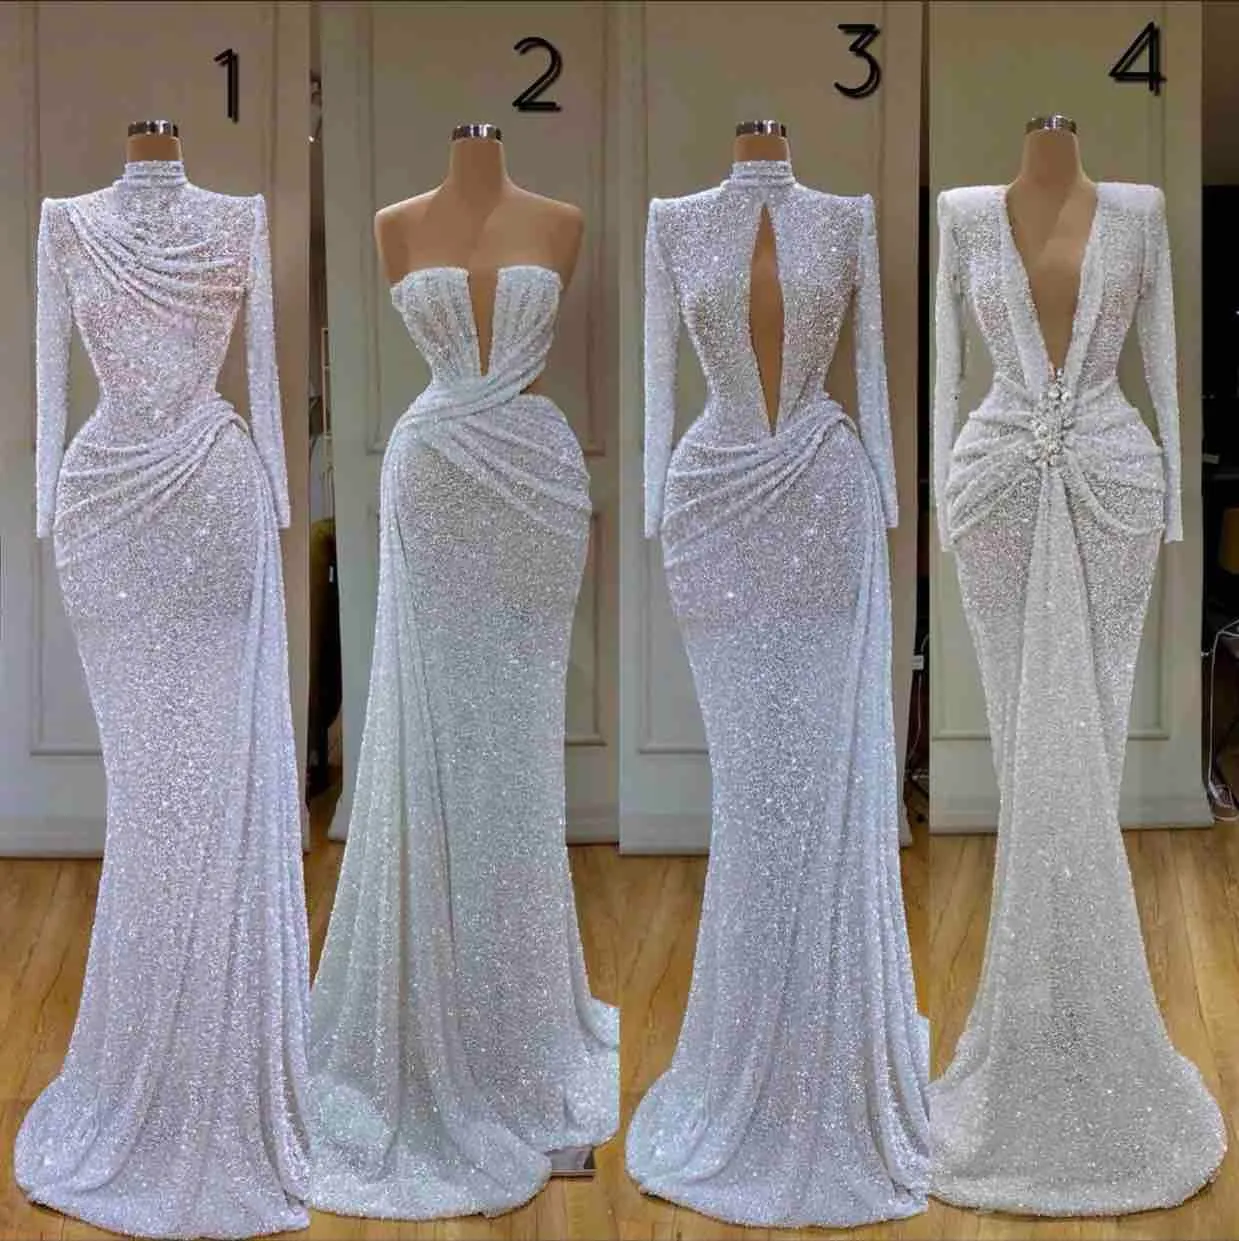 2021 Glitter Mermaid Evening Dresses Sequins Långärmad Sweep Train Formell Party Gowns Custom Made Prom Dress